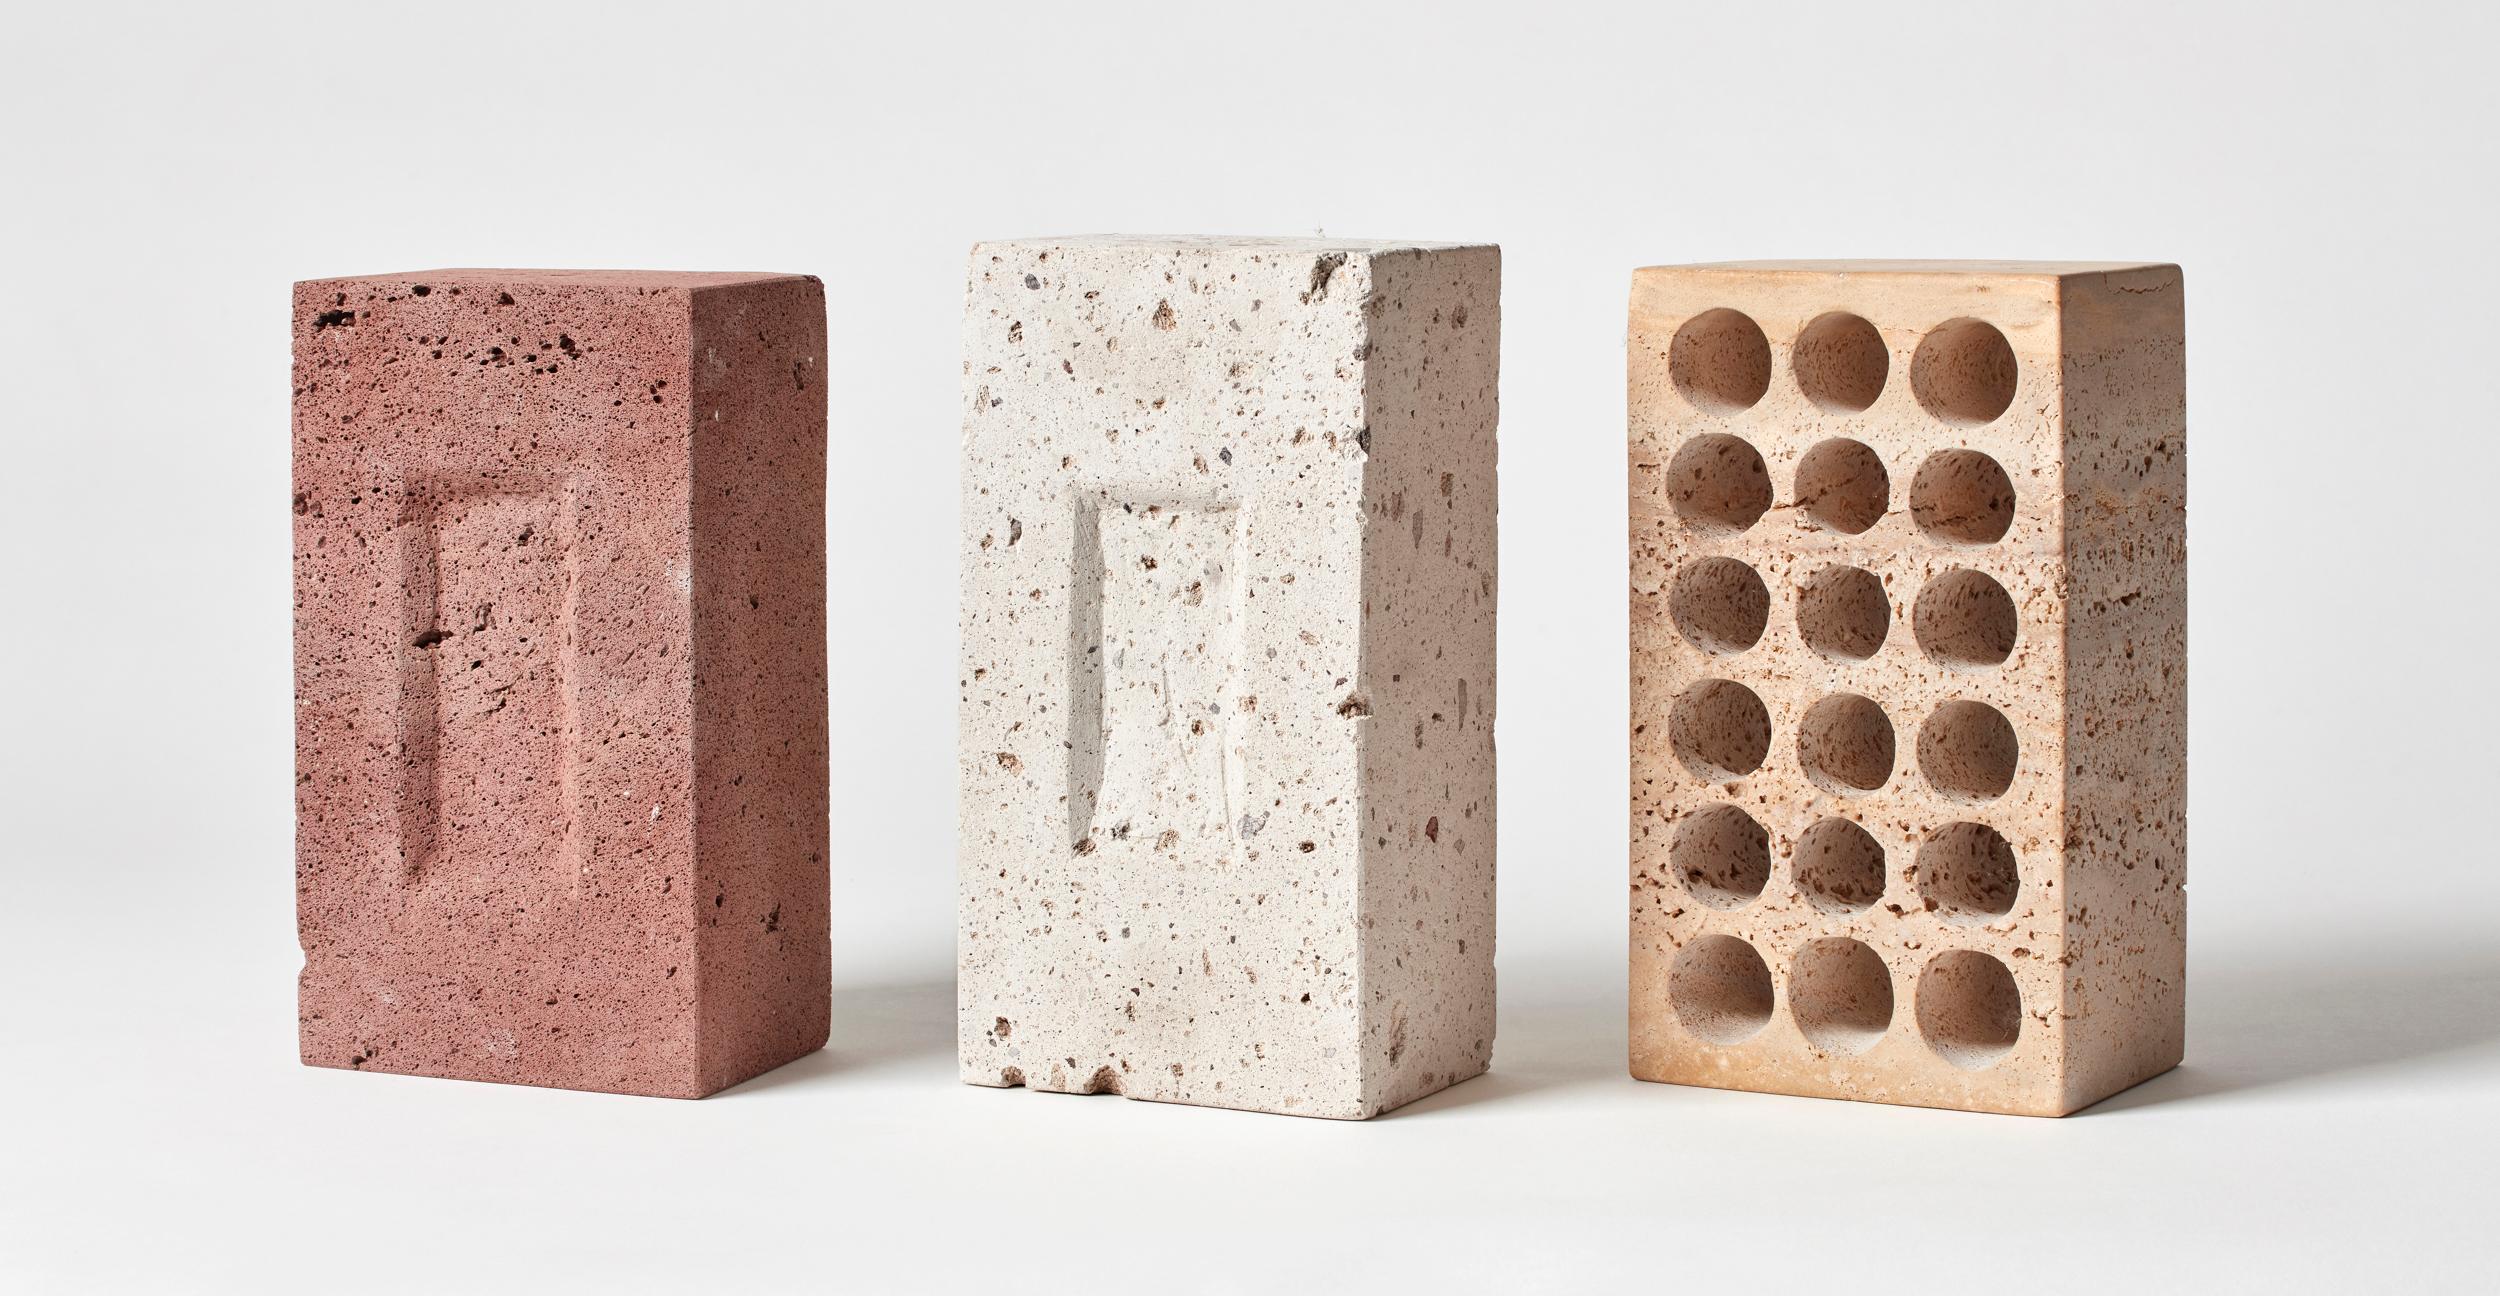 Set of 3 bricks by Estudio Rafael Freyre
Dimensions: W 12.5 D 9 x H 23 cm 
Materials: Andes stones
Also available: Other finishes available

The brick is a generic constructive element that constitutes part of the urban imaginary. In Peru,